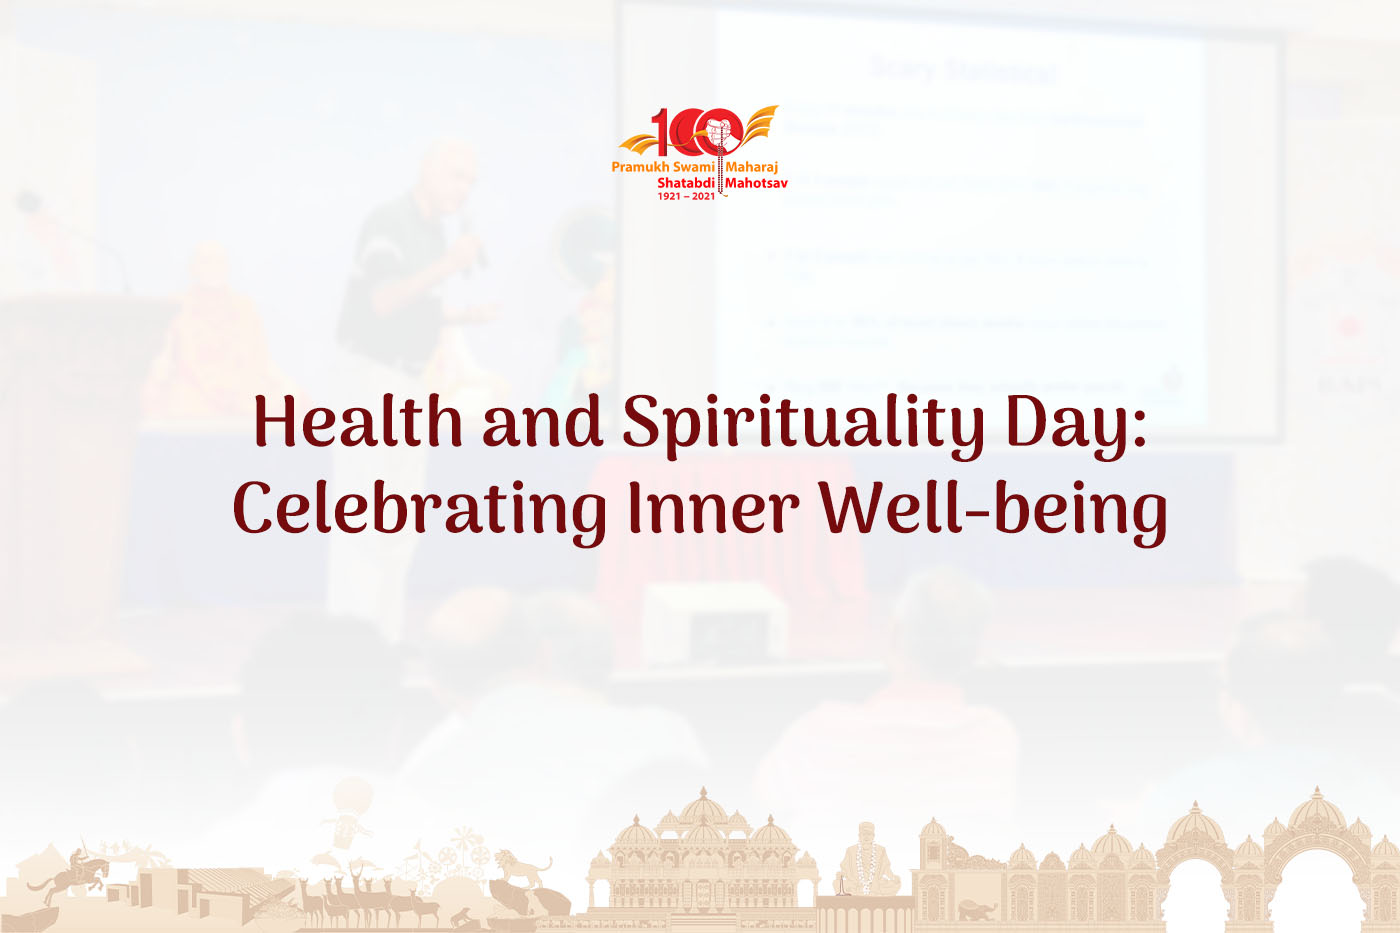 Health and Spirituality Day: Celebrating Inner Well-being